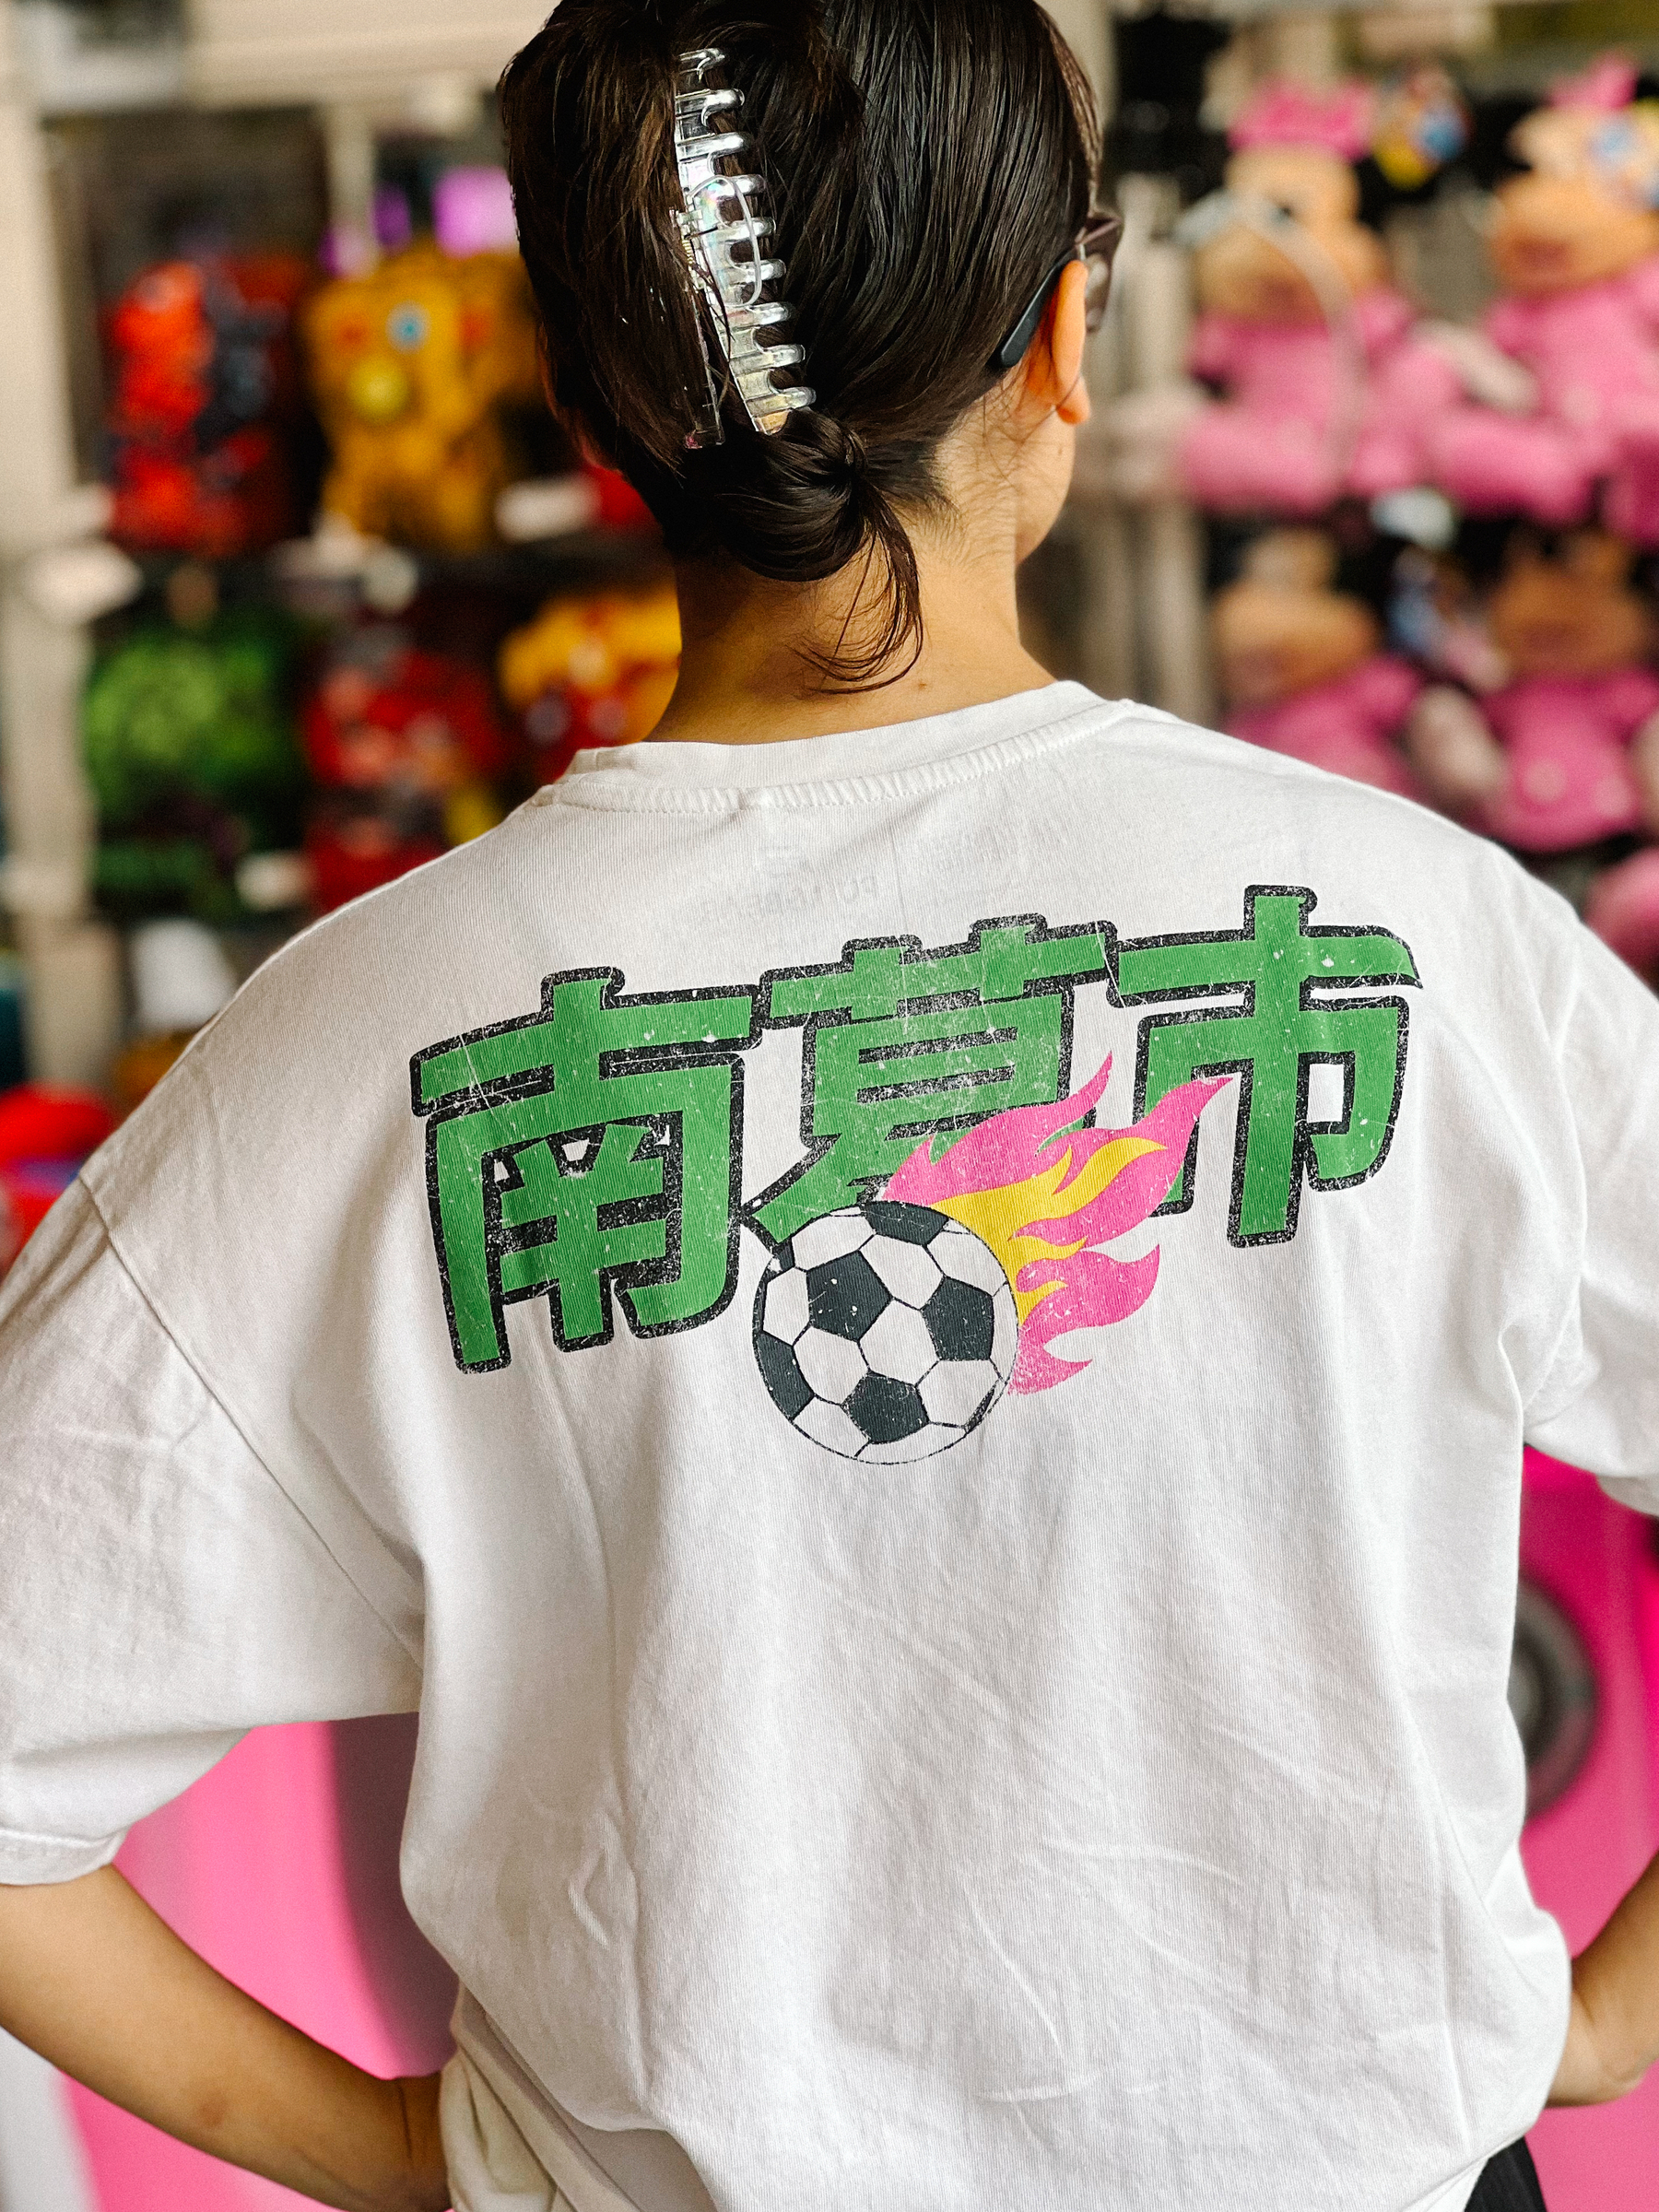 A girl with a Japanese t-shirt. 